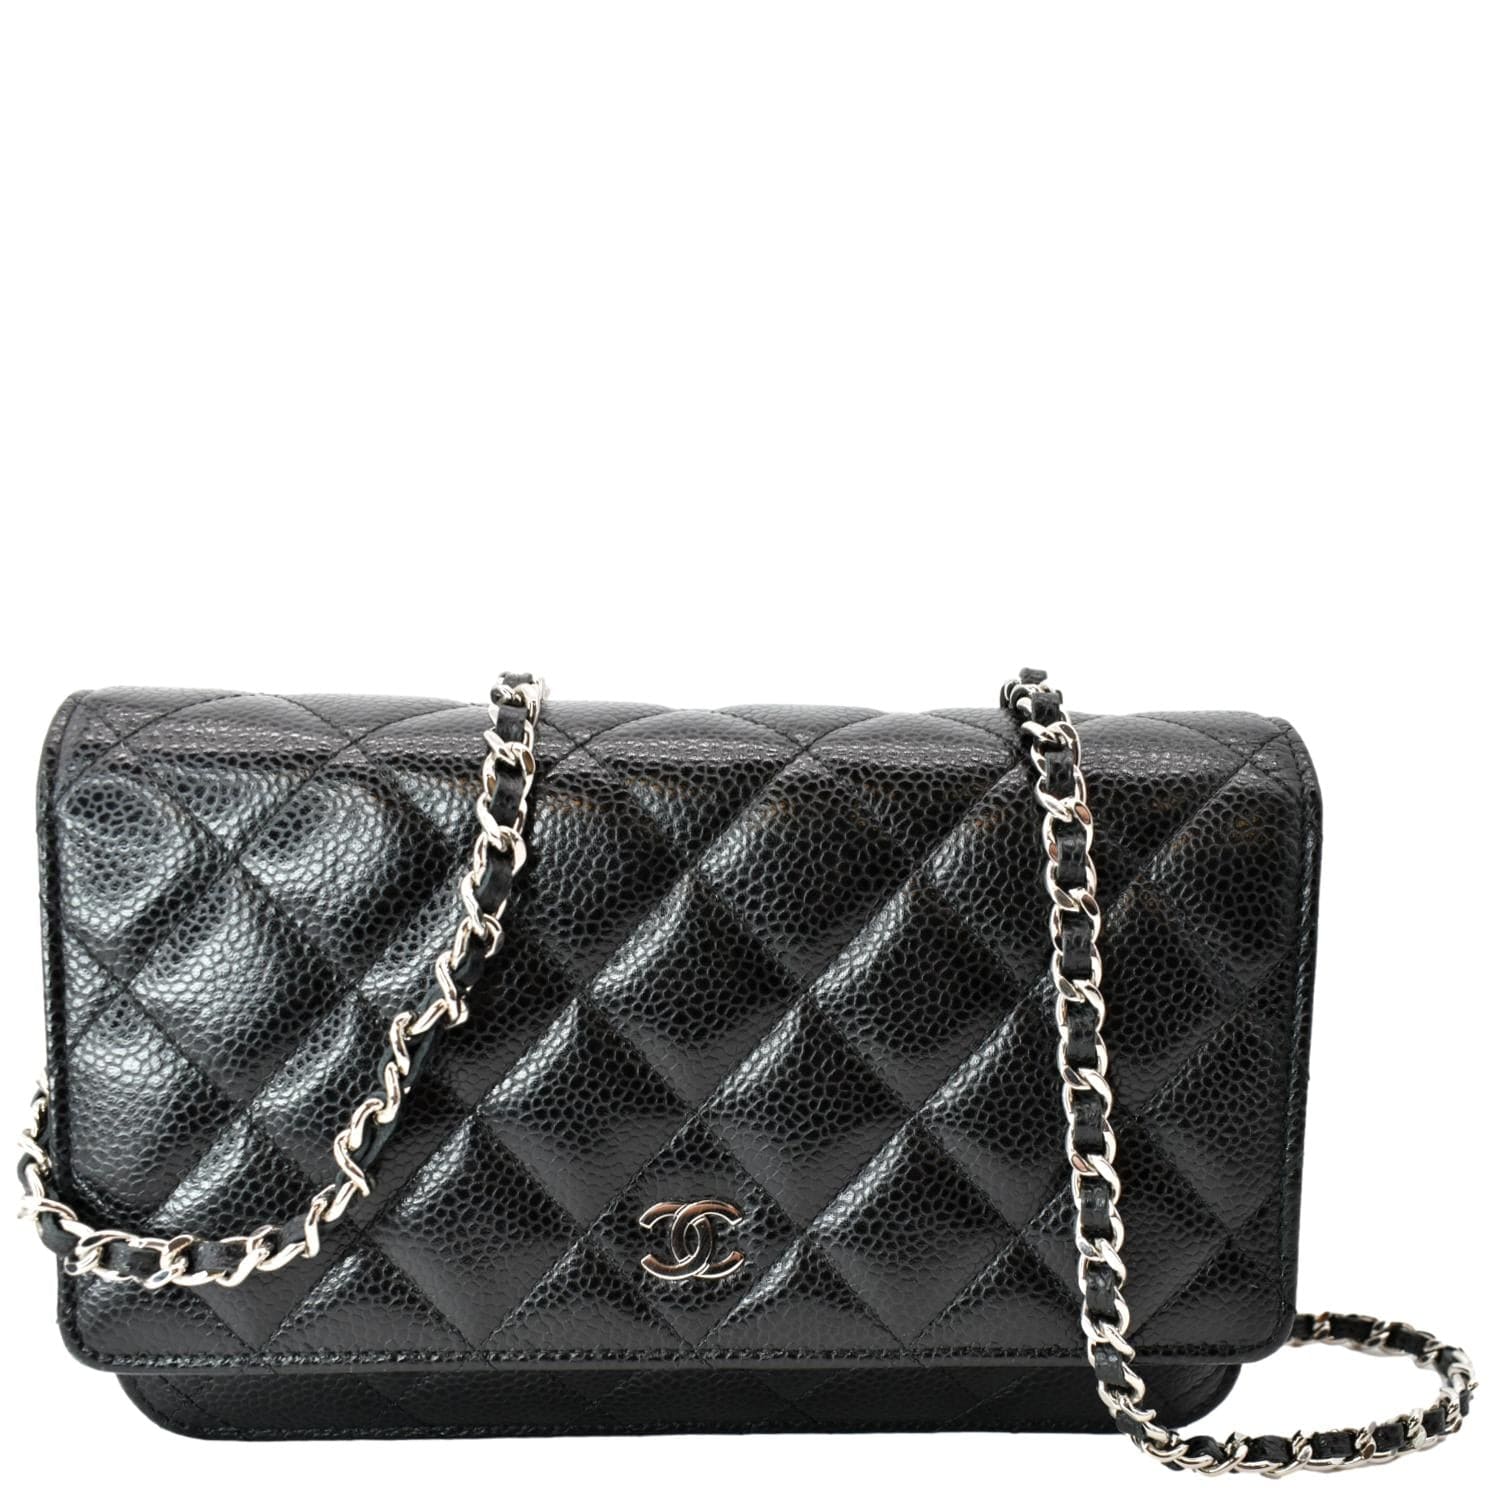 CHANEL, Bags, Chanel Black Caviar Leather Woc